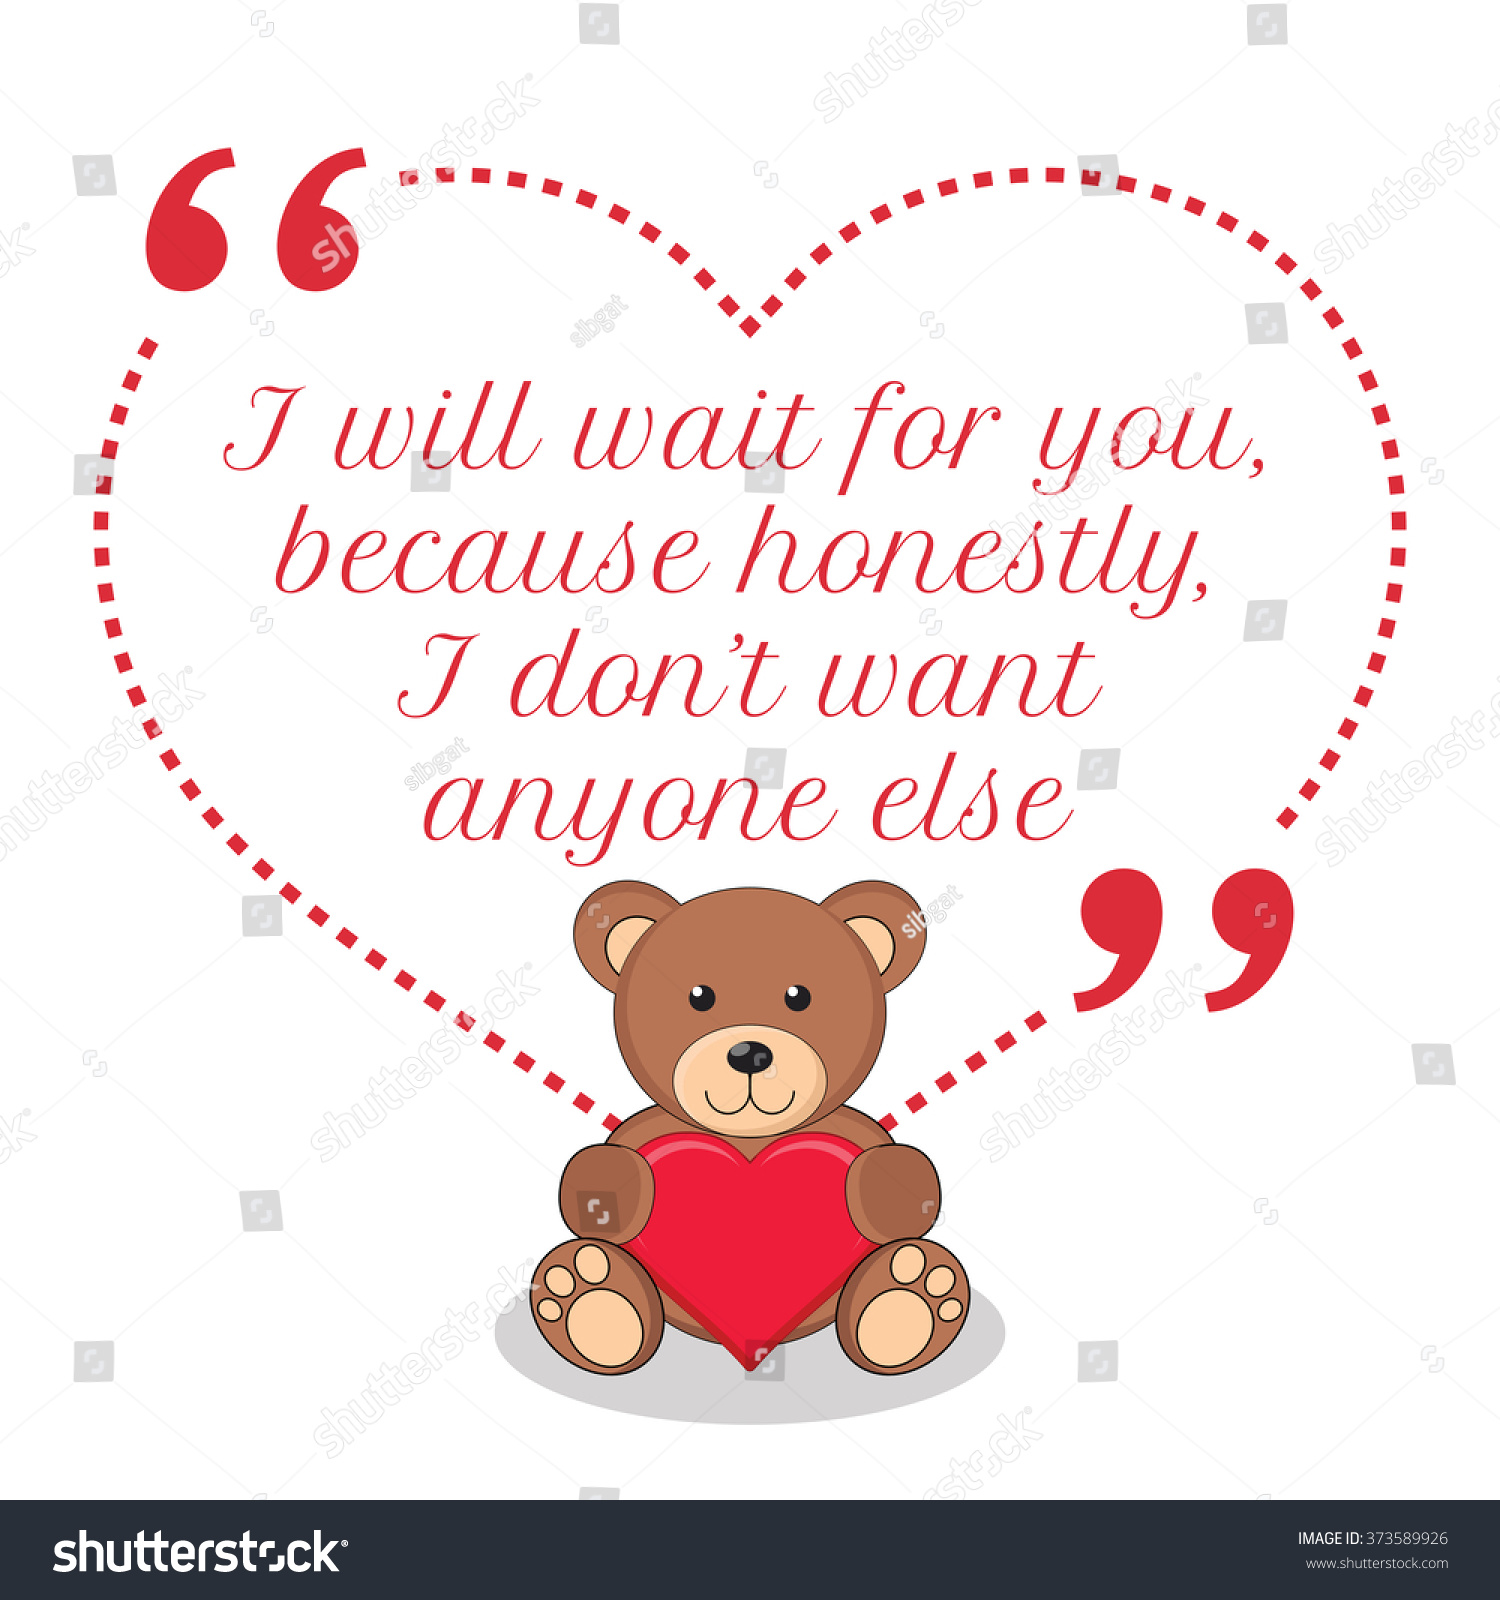 Inspirational love quote I will wait for you because honestly I don